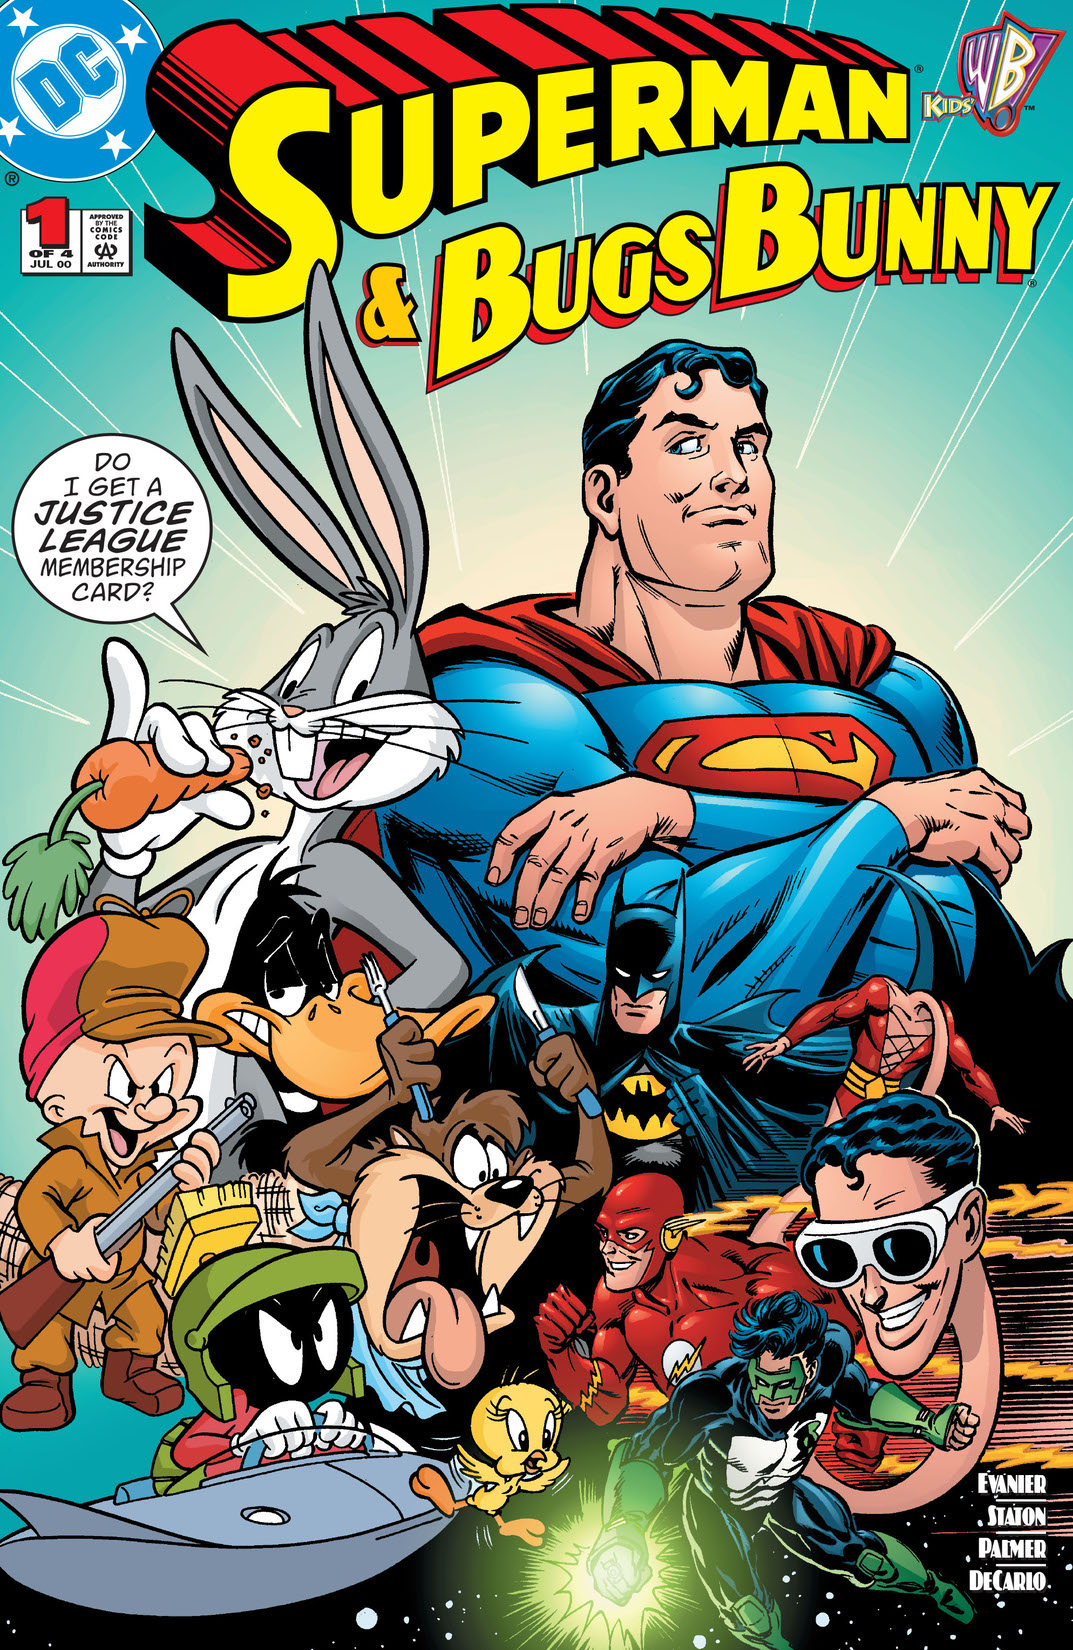 Superman & Bugs Bunny #1 preview images